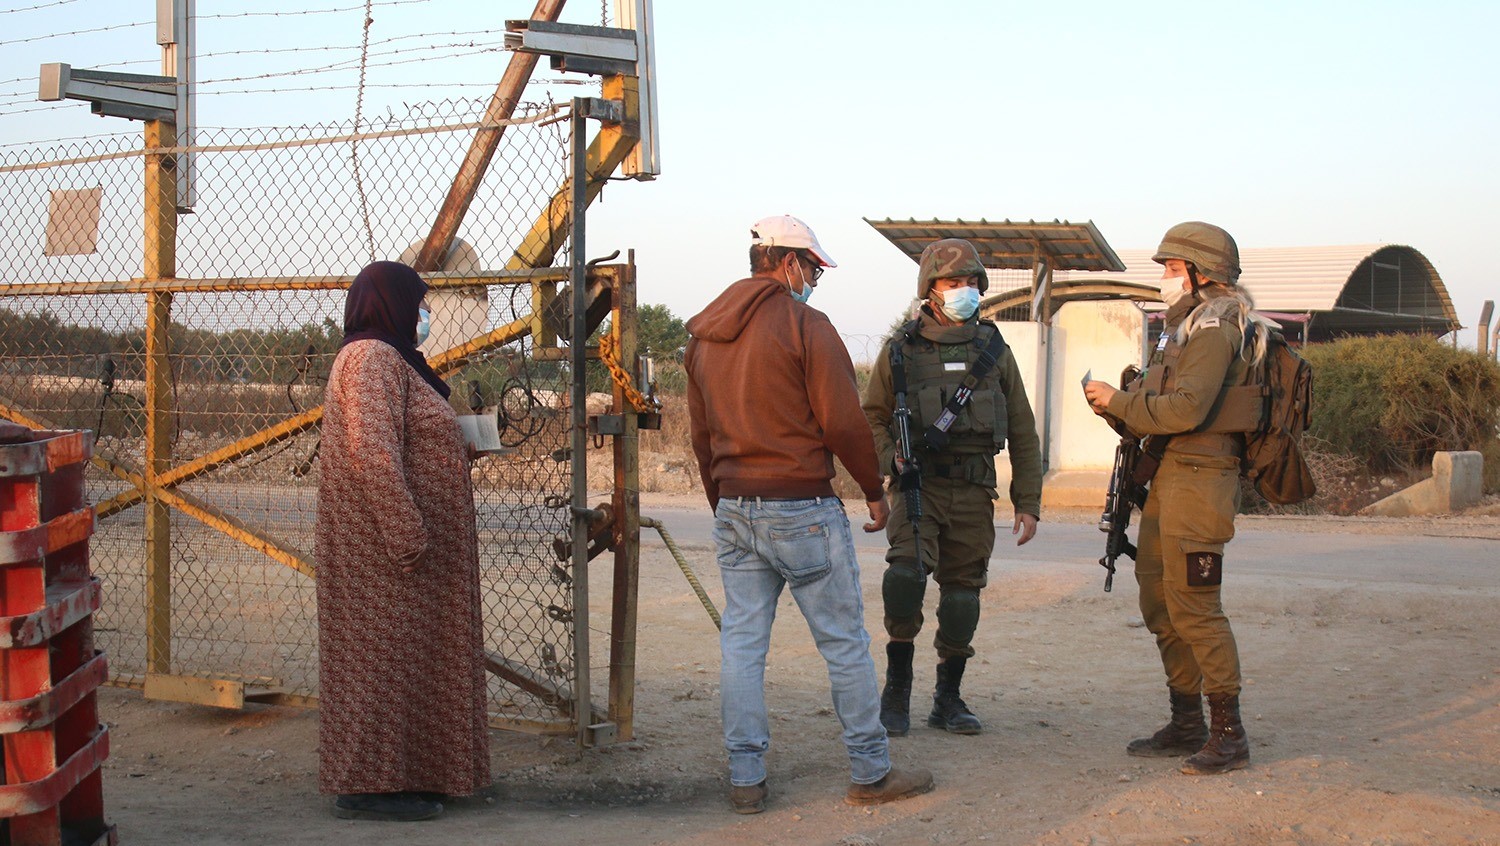 Occupation soldiers verify the identity of Palestinian farmers in the West Bank.